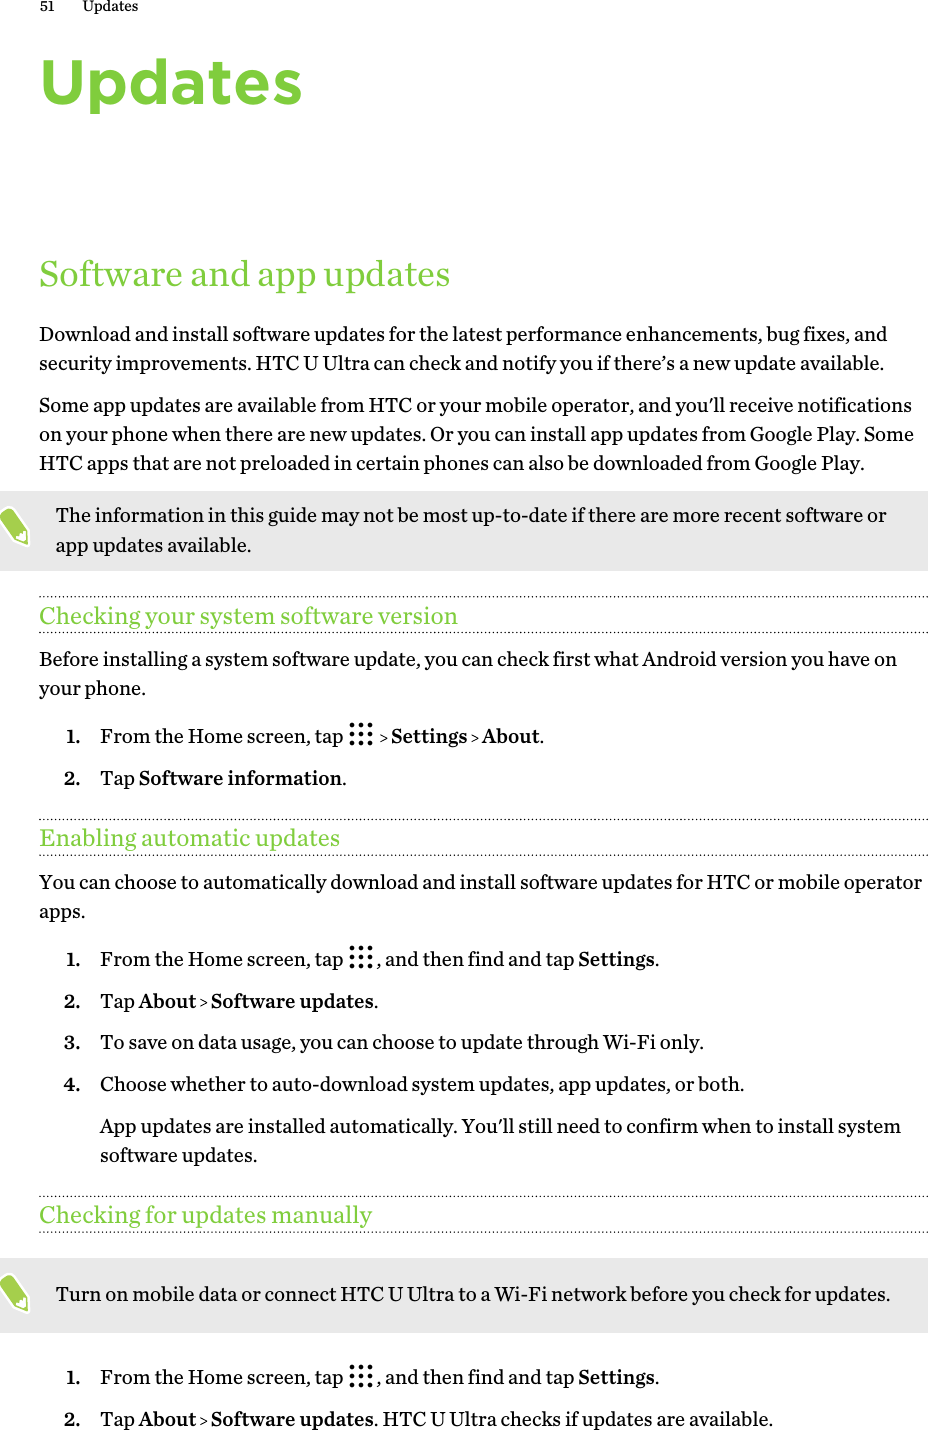 UpdatesSoftware and app updatesDownload and install software updates for the latest performance enhancements, bug fixes, andsecurity improvements. HTC U Ultra can check and notify you if there’s a new update available.Some app updates are available from HTC or your mobile operator, and you&apos;ll receive notificationson your phone when there are new updates. Or you can install app updates from Google Play. SomeHTC apps that are not preloaded in certain phones can also be downloaded from Google Play.The information in this guide may not be most up-to-date if there are more recent software orapp updates available.Checking your system software versionBefore installing a system software update, you can check first what Android version you have onyour phone.1. From the Home screen, tap     Settings   About.2. Tap Software information.Enabling automatic updatesYou can choose to automatically download and install software updates for HTC or mobile operatorapps.1. From the Home screen, tap  , and then find and tap Settings.2. Tap About   Software updates.3. To save on data usage, you can choose to update through Wi-Fi only.4. Choose whether to auto-download system updates, app updates, or both. App updates are installed automatically. You&apos;ll still need to confirm when to install systemsoftware updates.Checking for updates manuallyTurn on mobile data or connect HTC U Ultra to a Wi-Fi network before you check for updates.1. From the Home screen, tap  , and then find and tap Settings.2. Tap About   Software updates. HTC U Ultra checks if updates are available.51 Updates